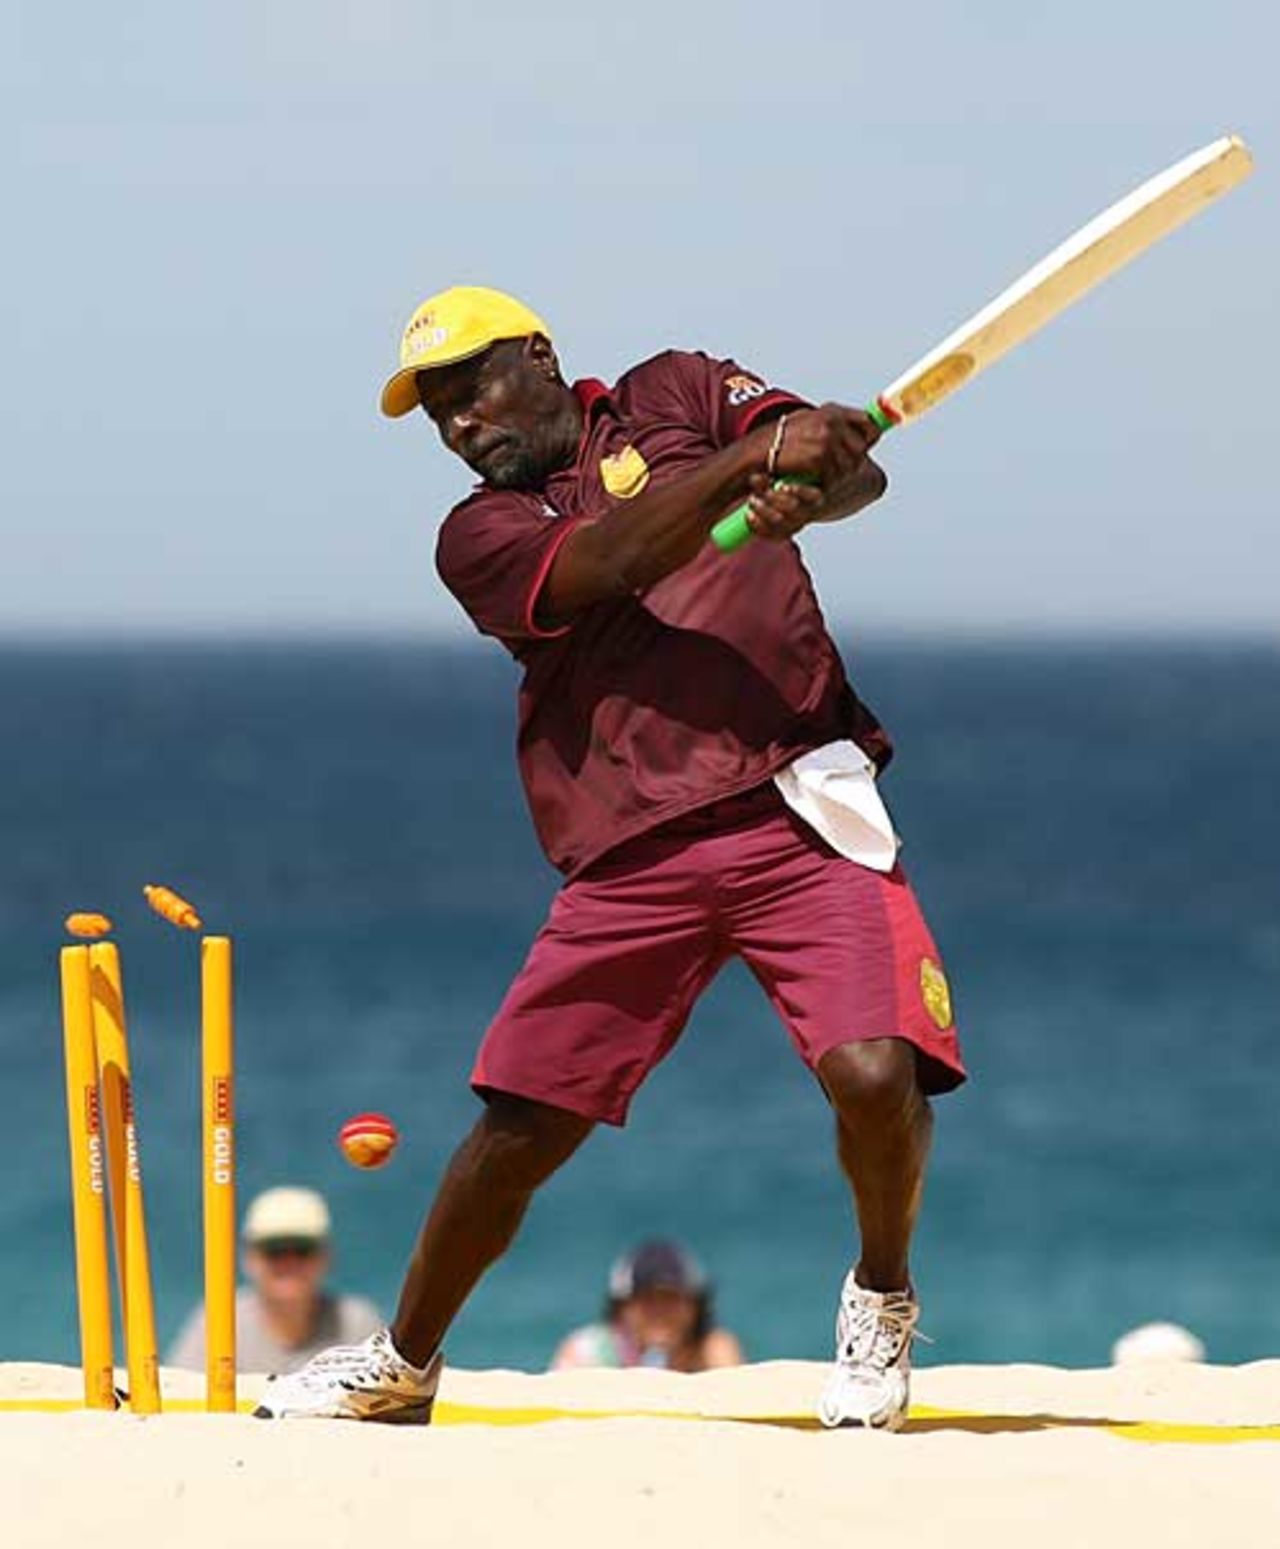 Viv Richards is bowled during beach cricket, Scarborough Beach, Perth, January 27, 2007